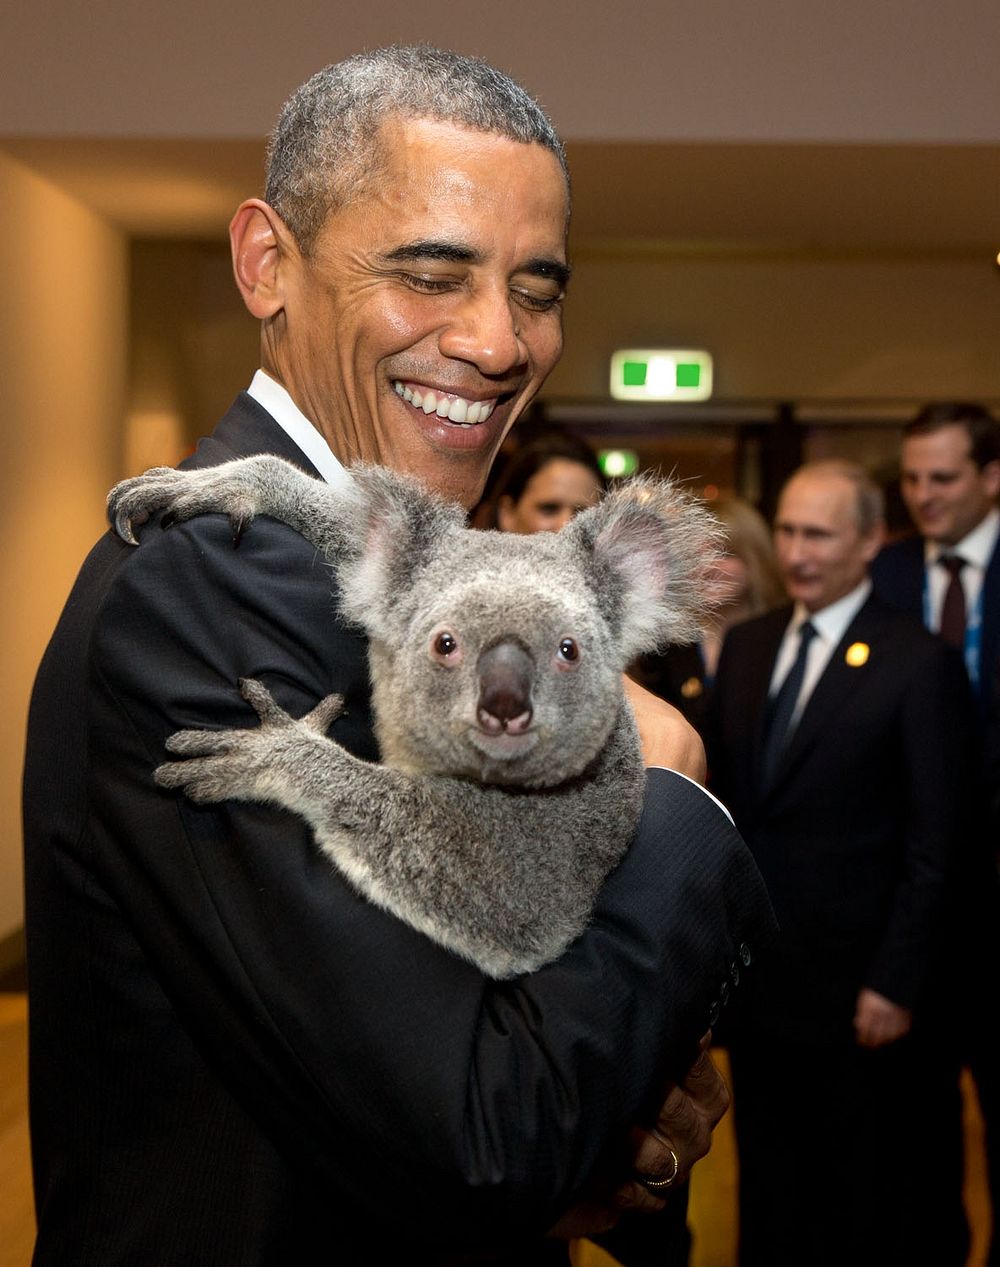 "The President holds a koala backstage prior to the G20 Welcome to Country Ceremony at the Brisbane Convention and…